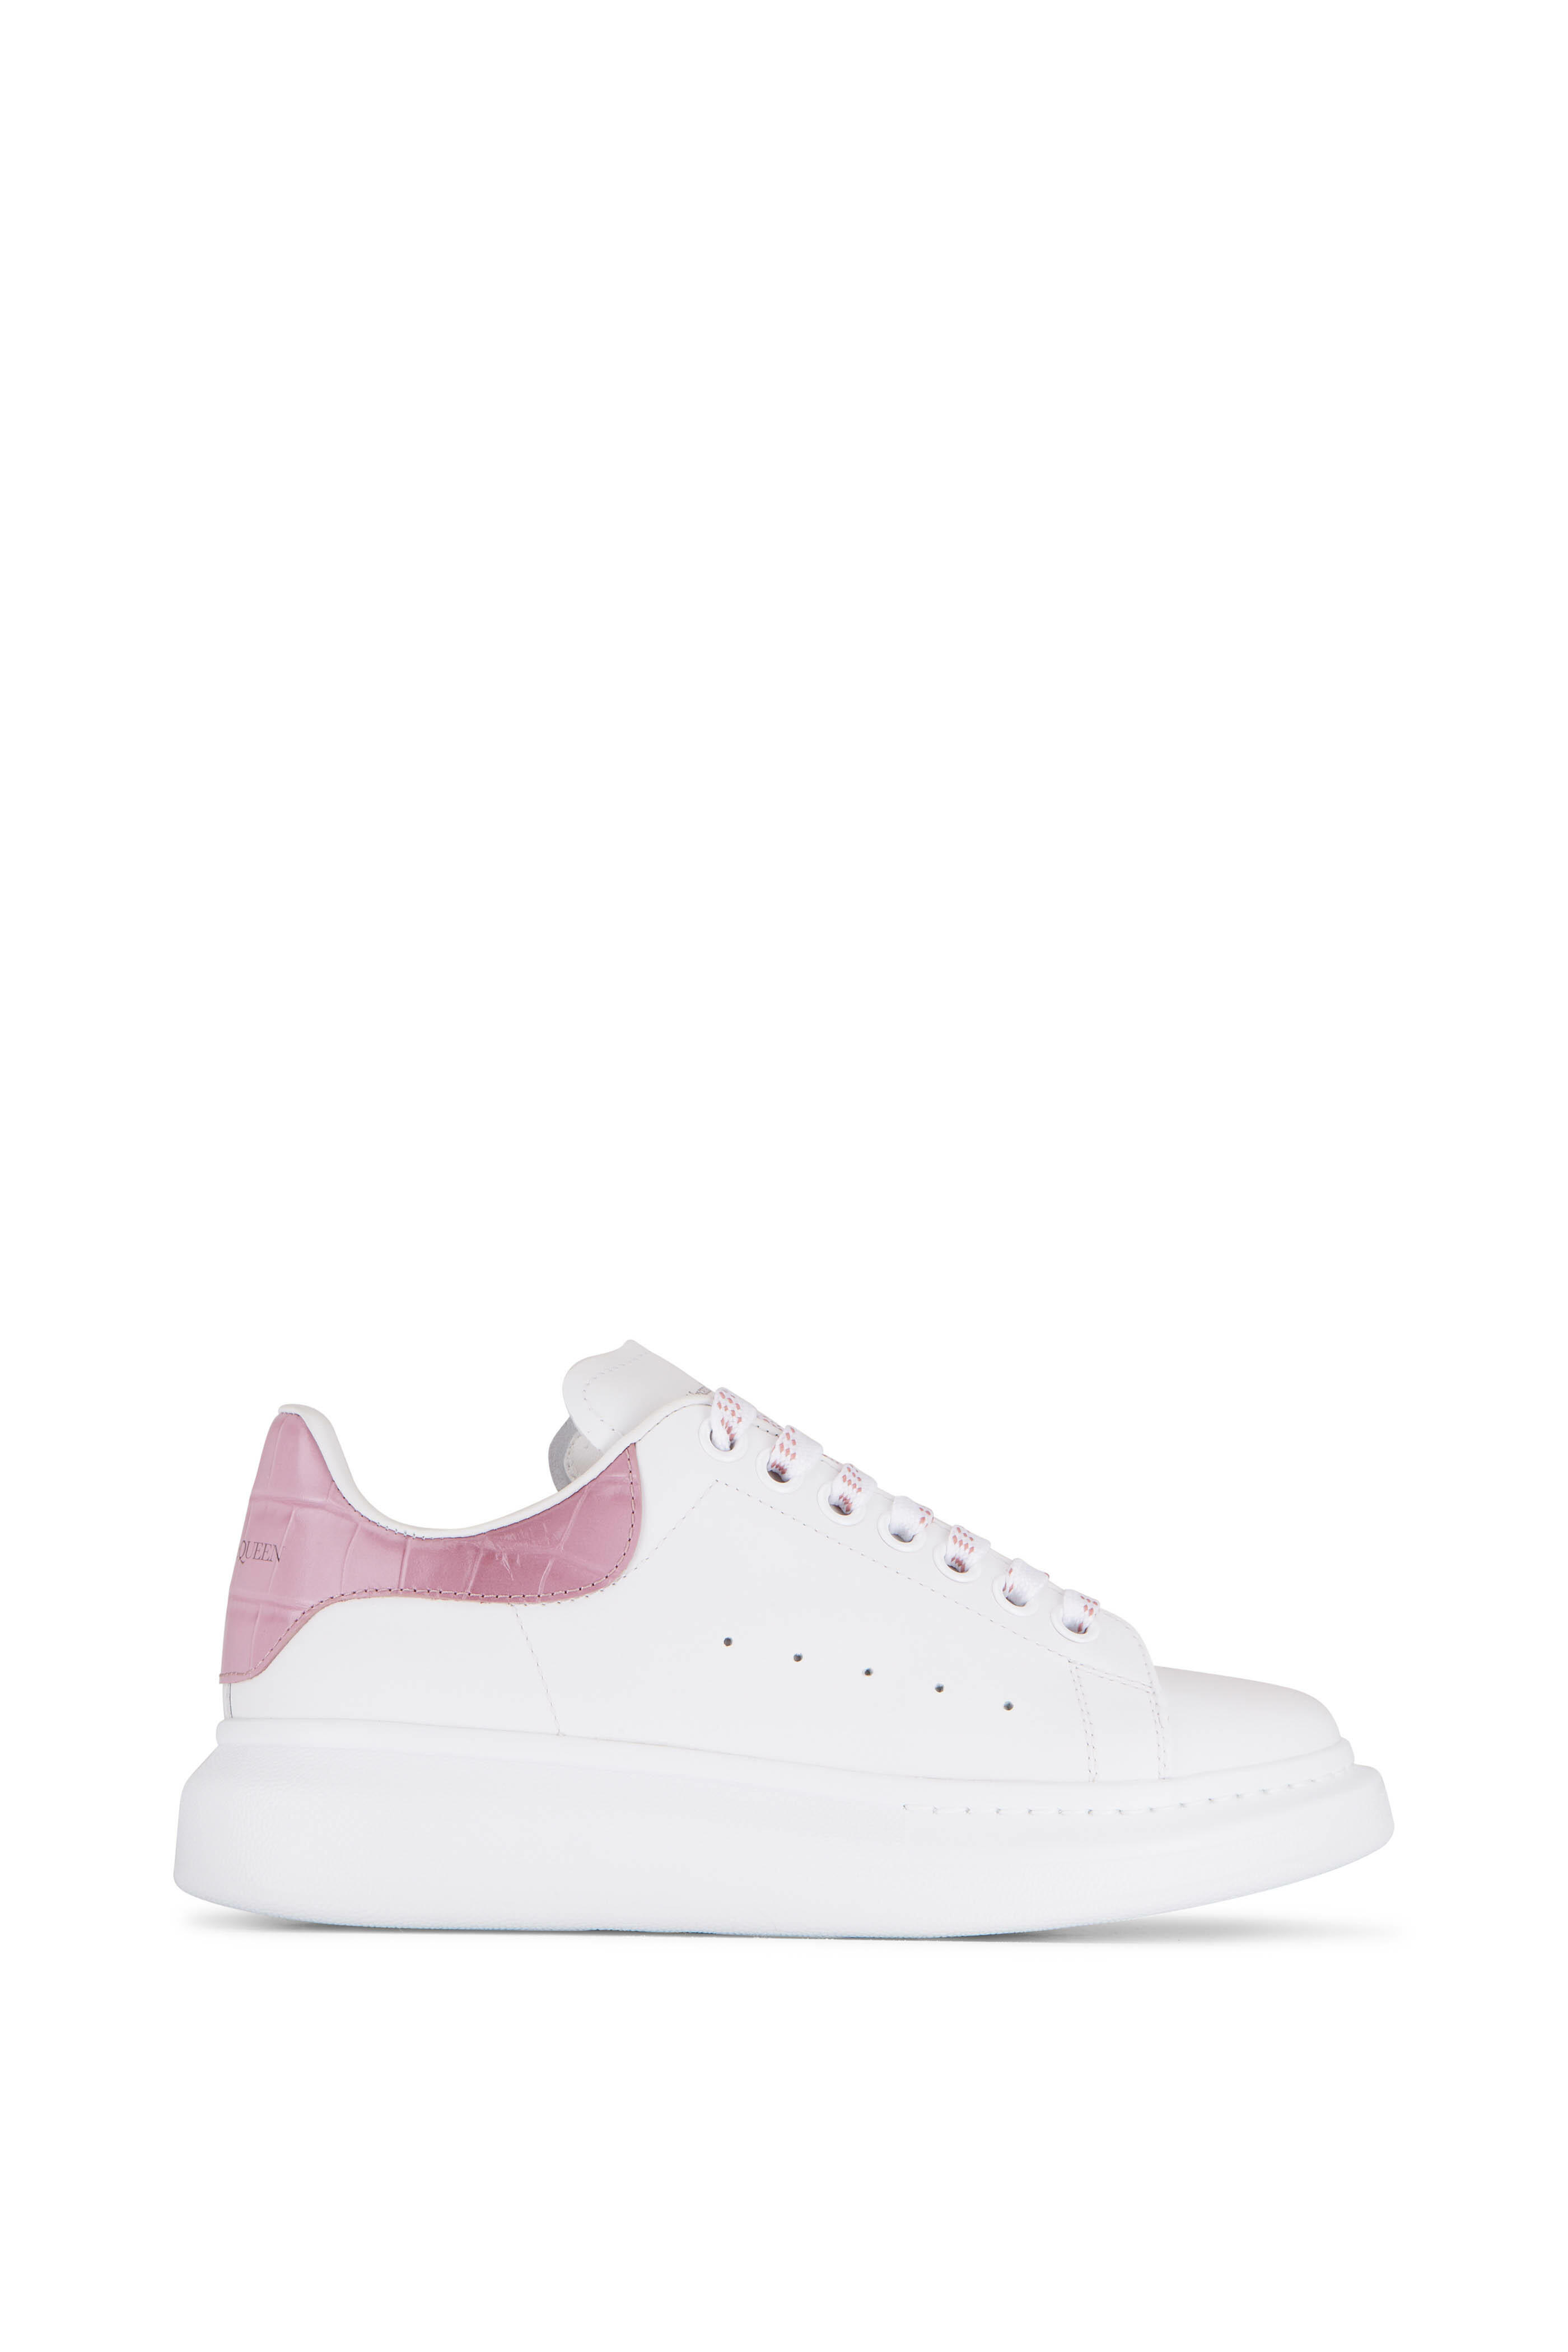 White and black classic sneakers  Alexander mcqueen sneakers, Outfits,  Stylish clothes for women